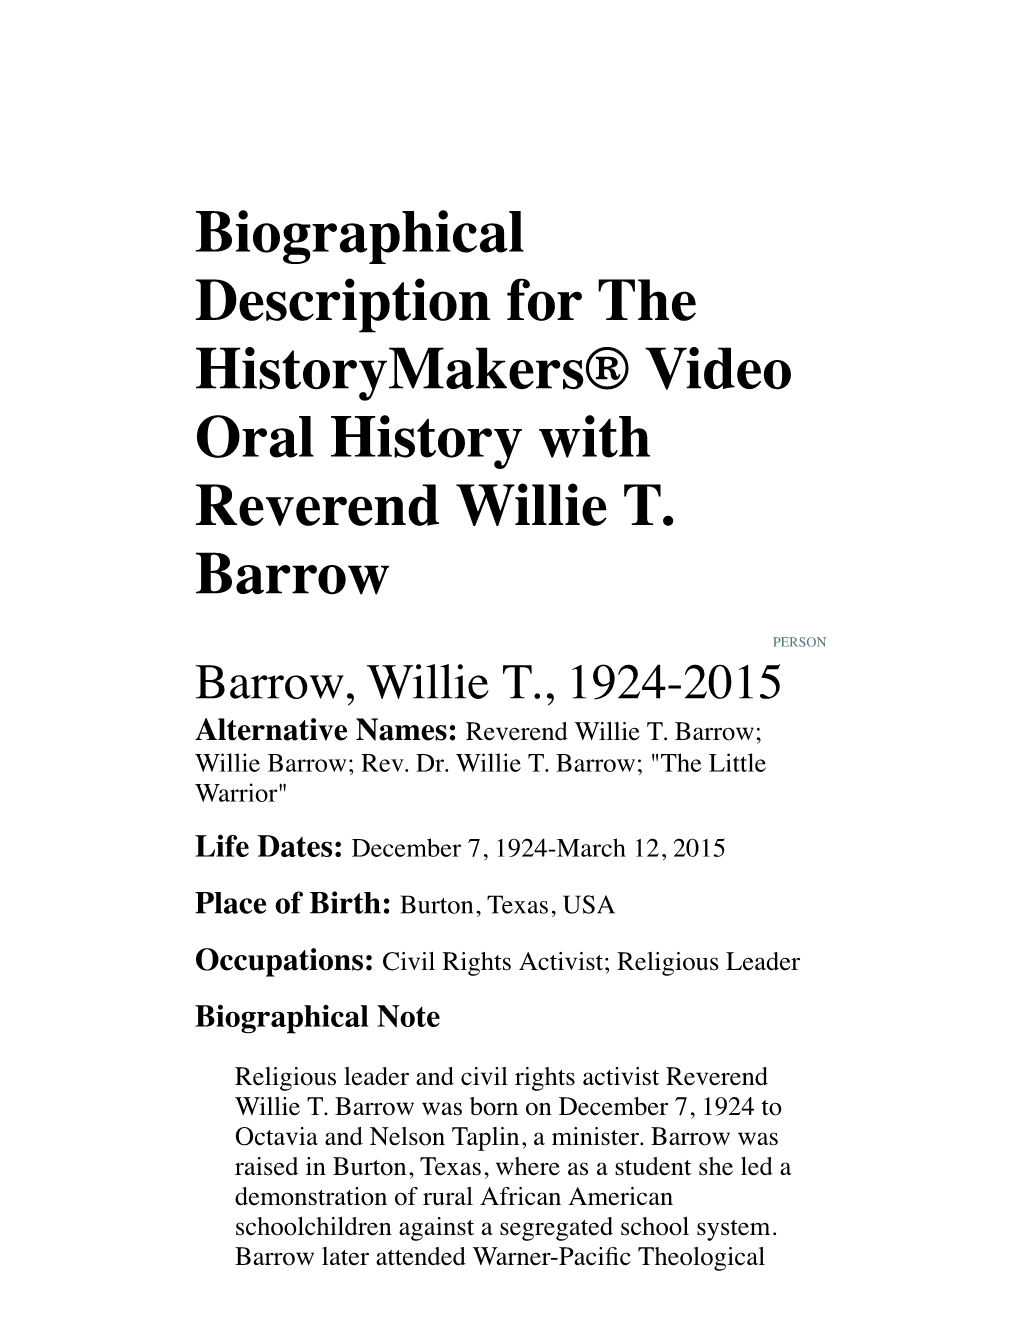 Biographical Description for the Historymakers® Video Oral History with Reverend Willie T